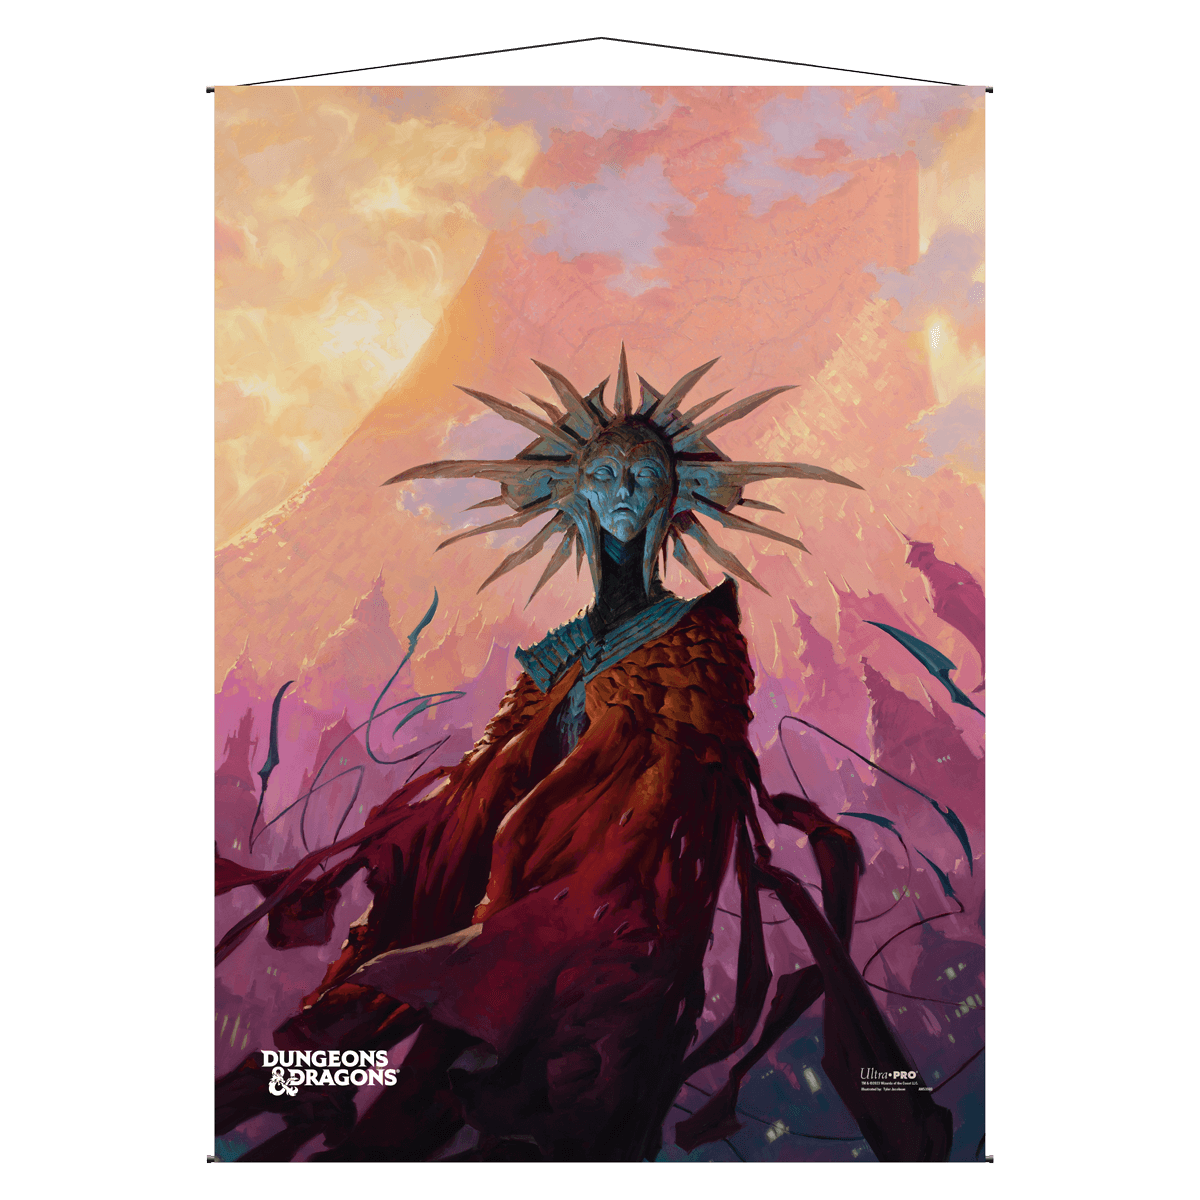 Planescape: Adventures in the Multiverse for Dungeons & Dragons Wall Scroll - Sigil and the Outlands Standard Cover Artwork v3 | Ultra PRO International